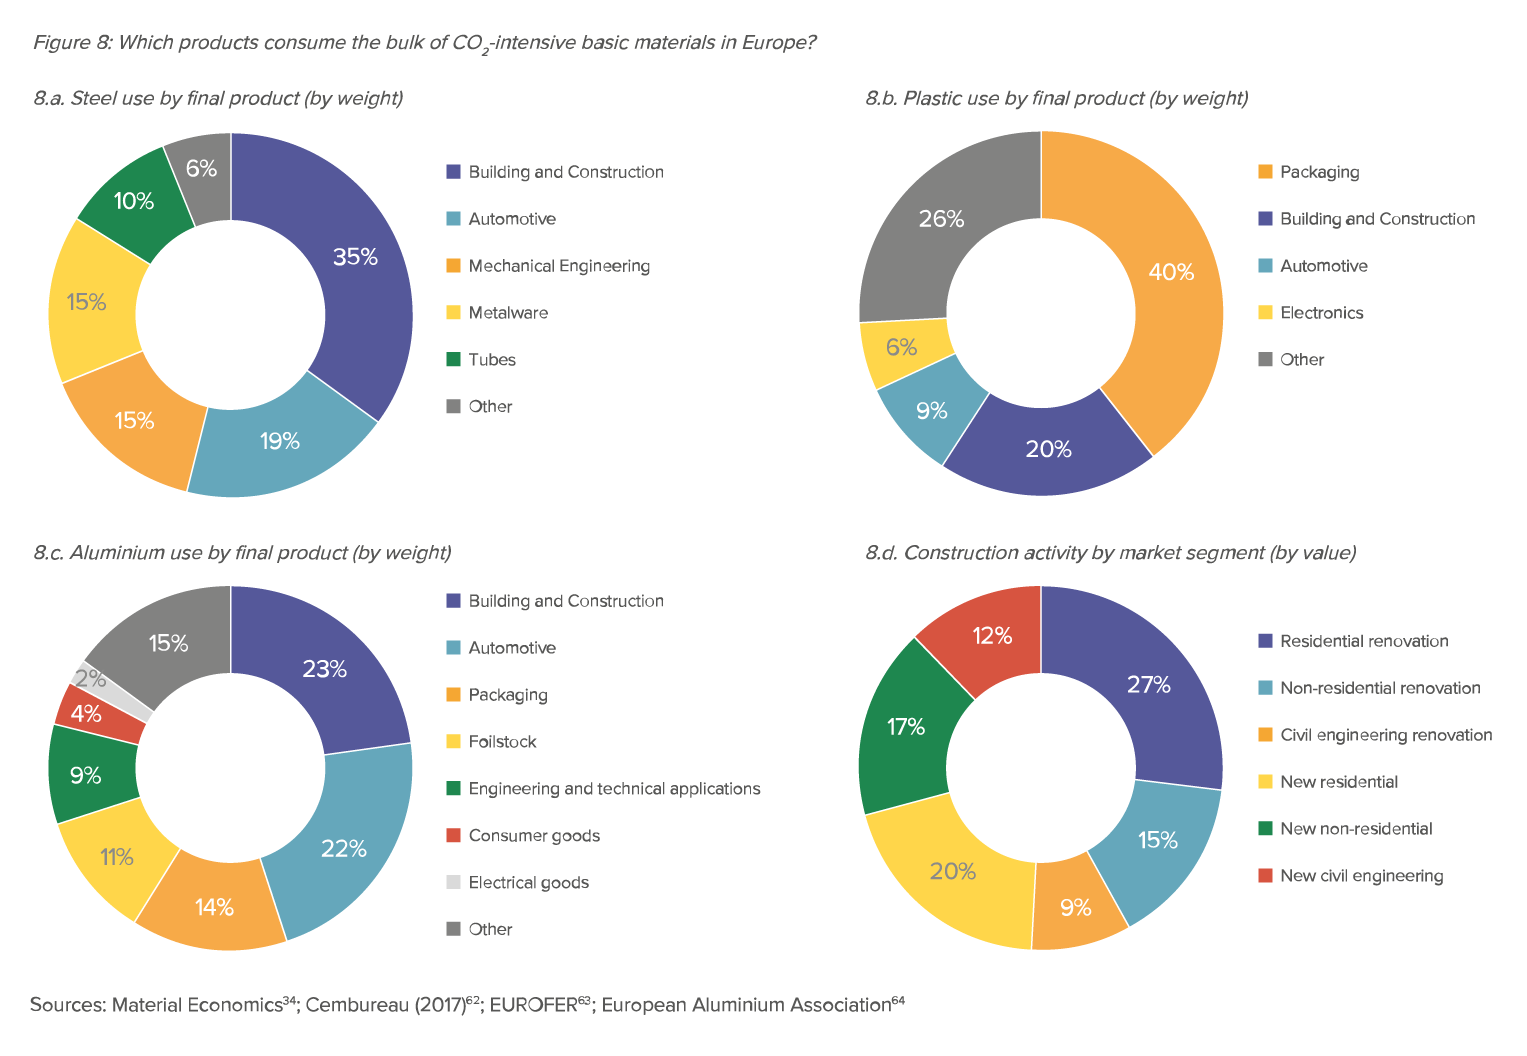 Preview for Which products consume the bulk of CO₂-intensive basic materials in Europe?